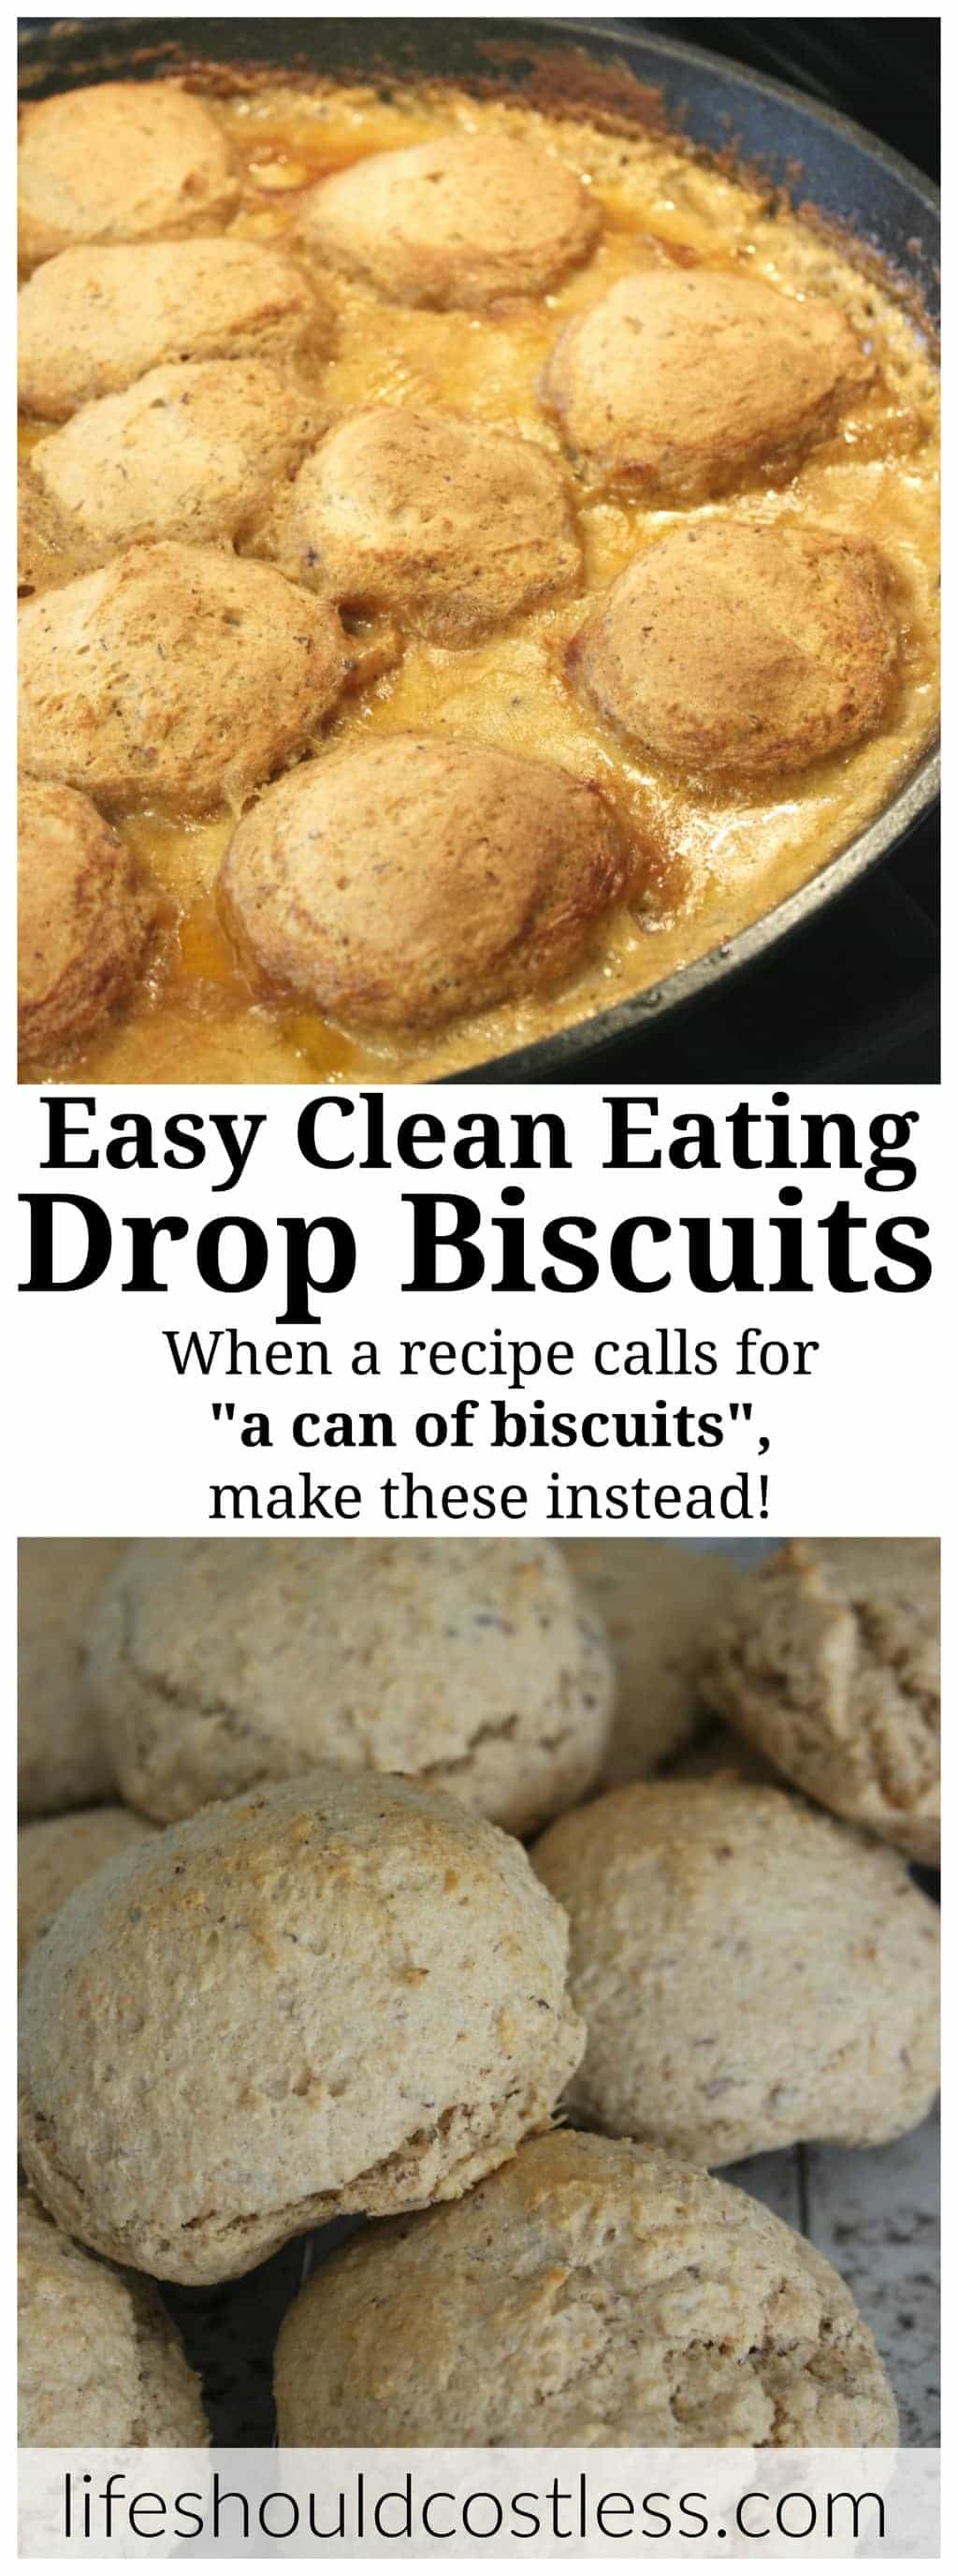 Easy Clean Eating Drop Biscuits. When a recipe calls for "a can of biscuits", make these instead. Just a few minutes of prep and you'll have fresh, delicious drop biscuits in no time! #realfood #eatclean {lifeshouldcostless.com}